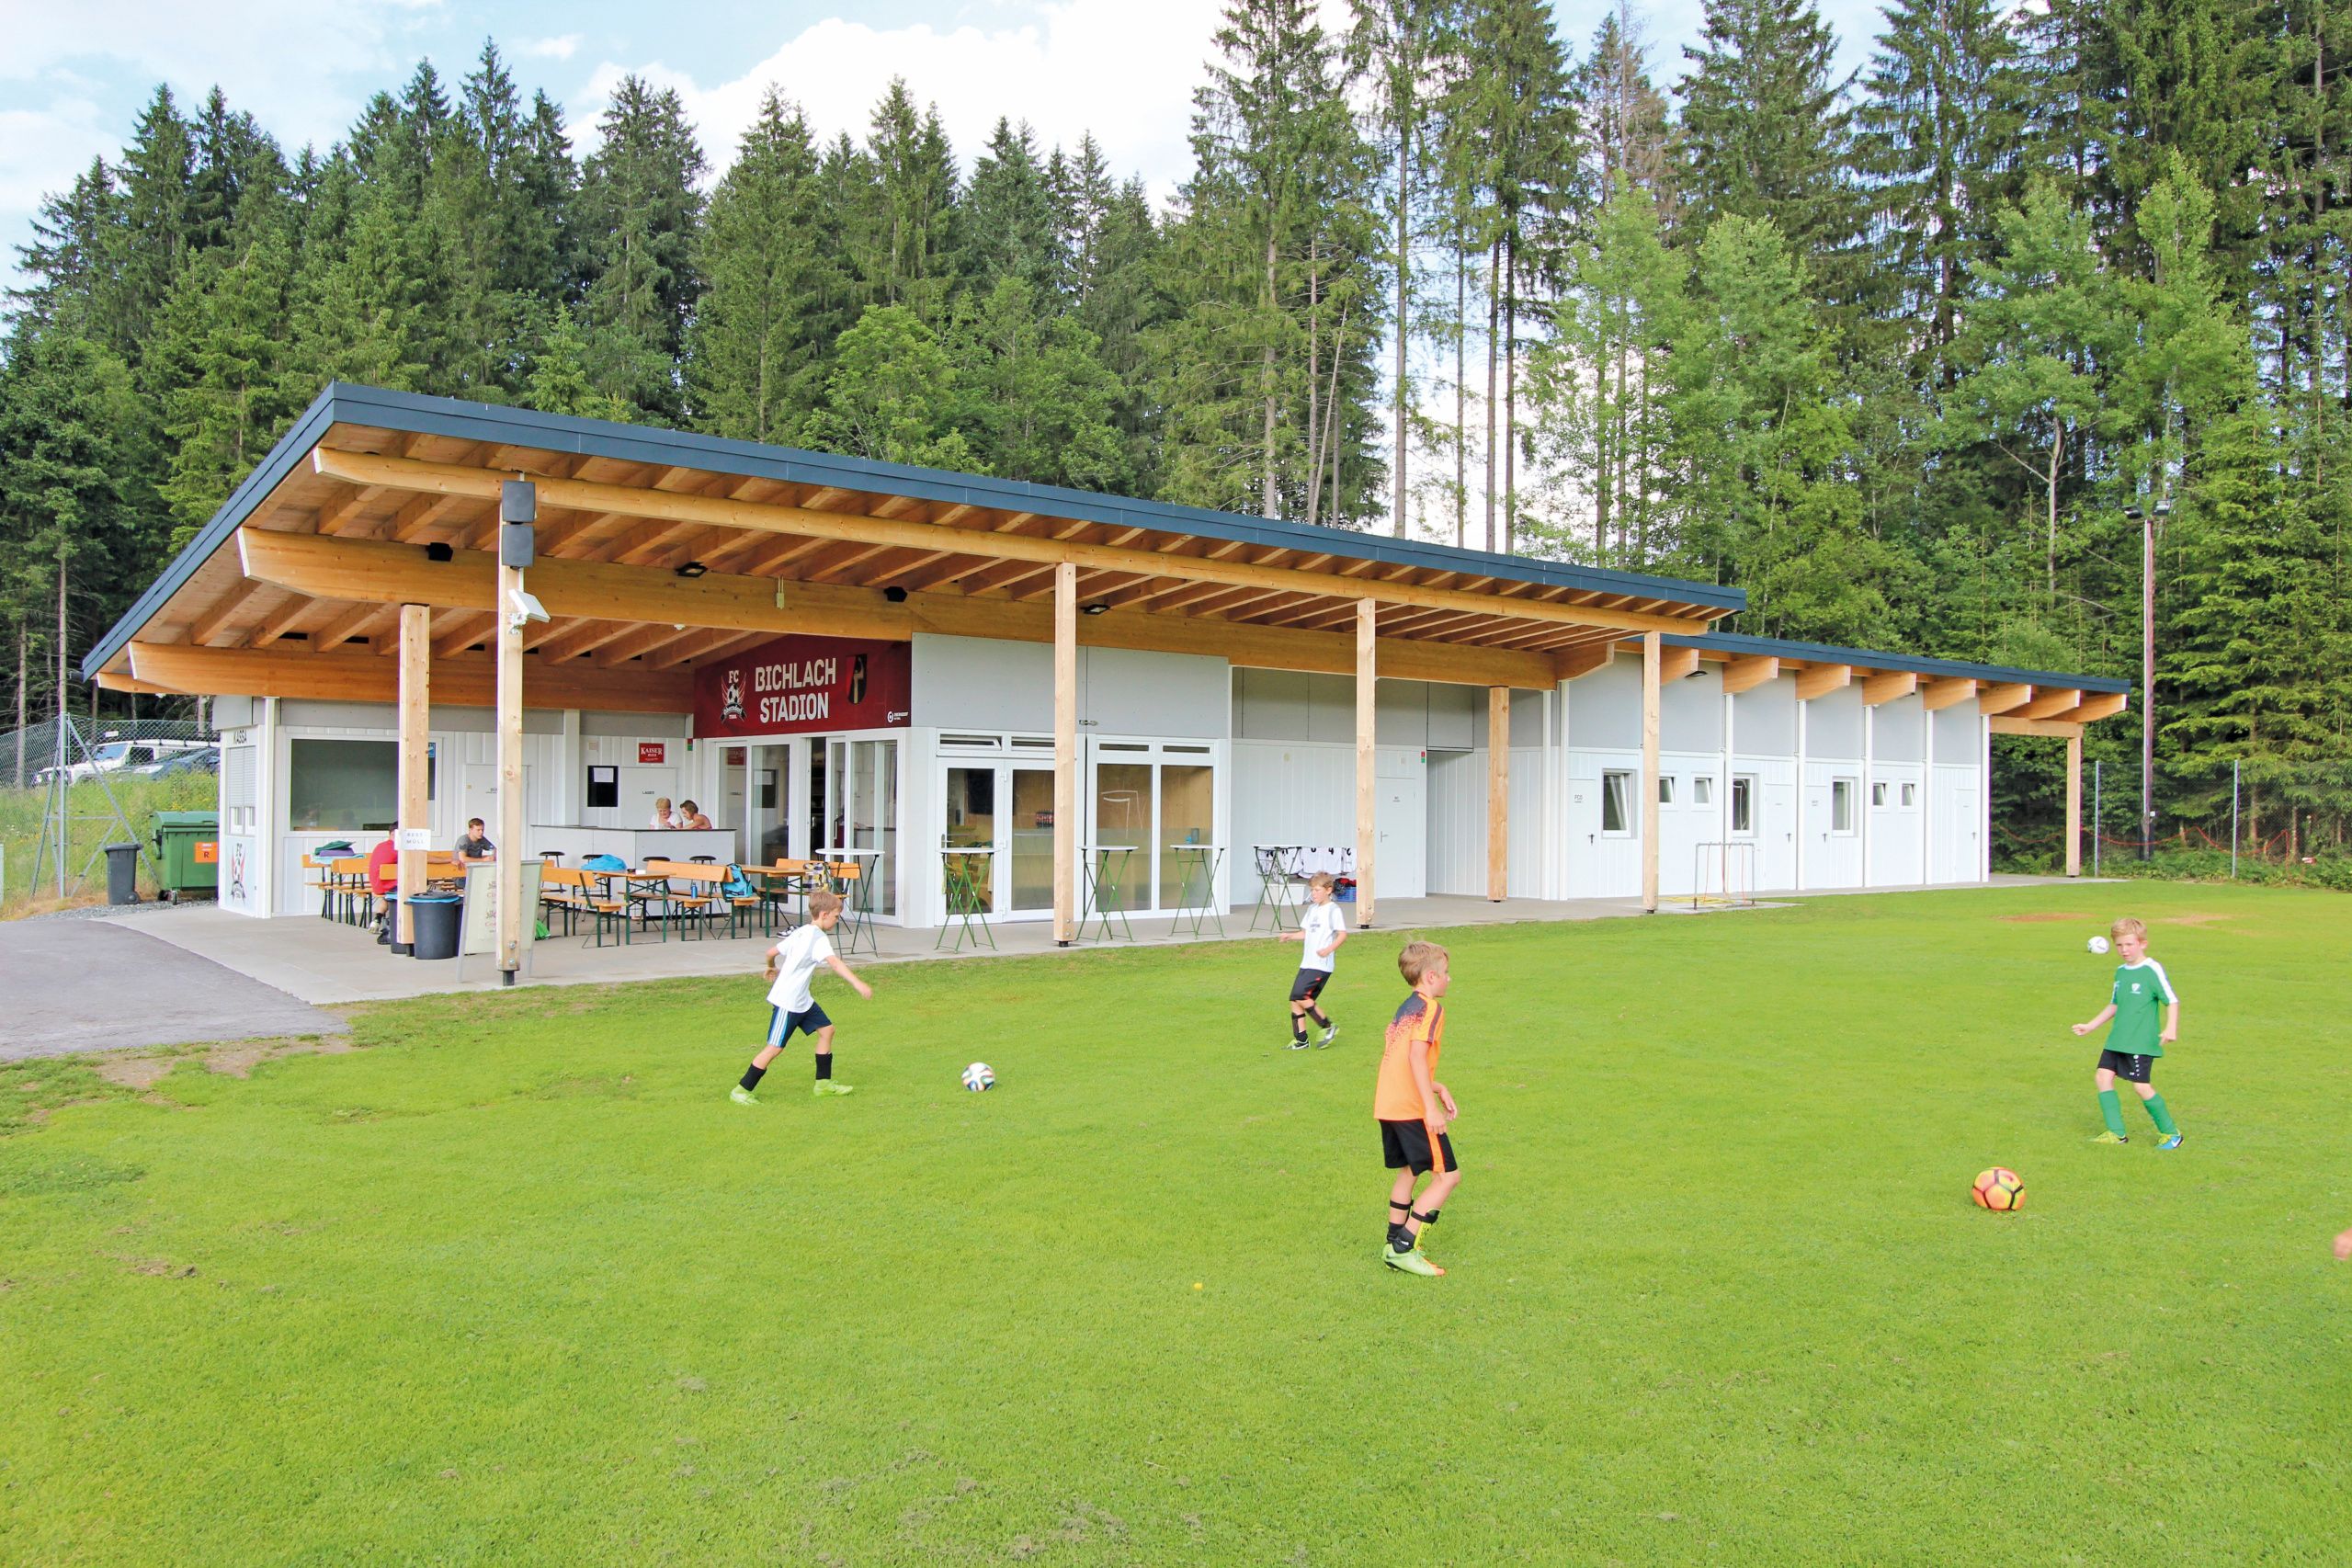 Club houses and changing rooms